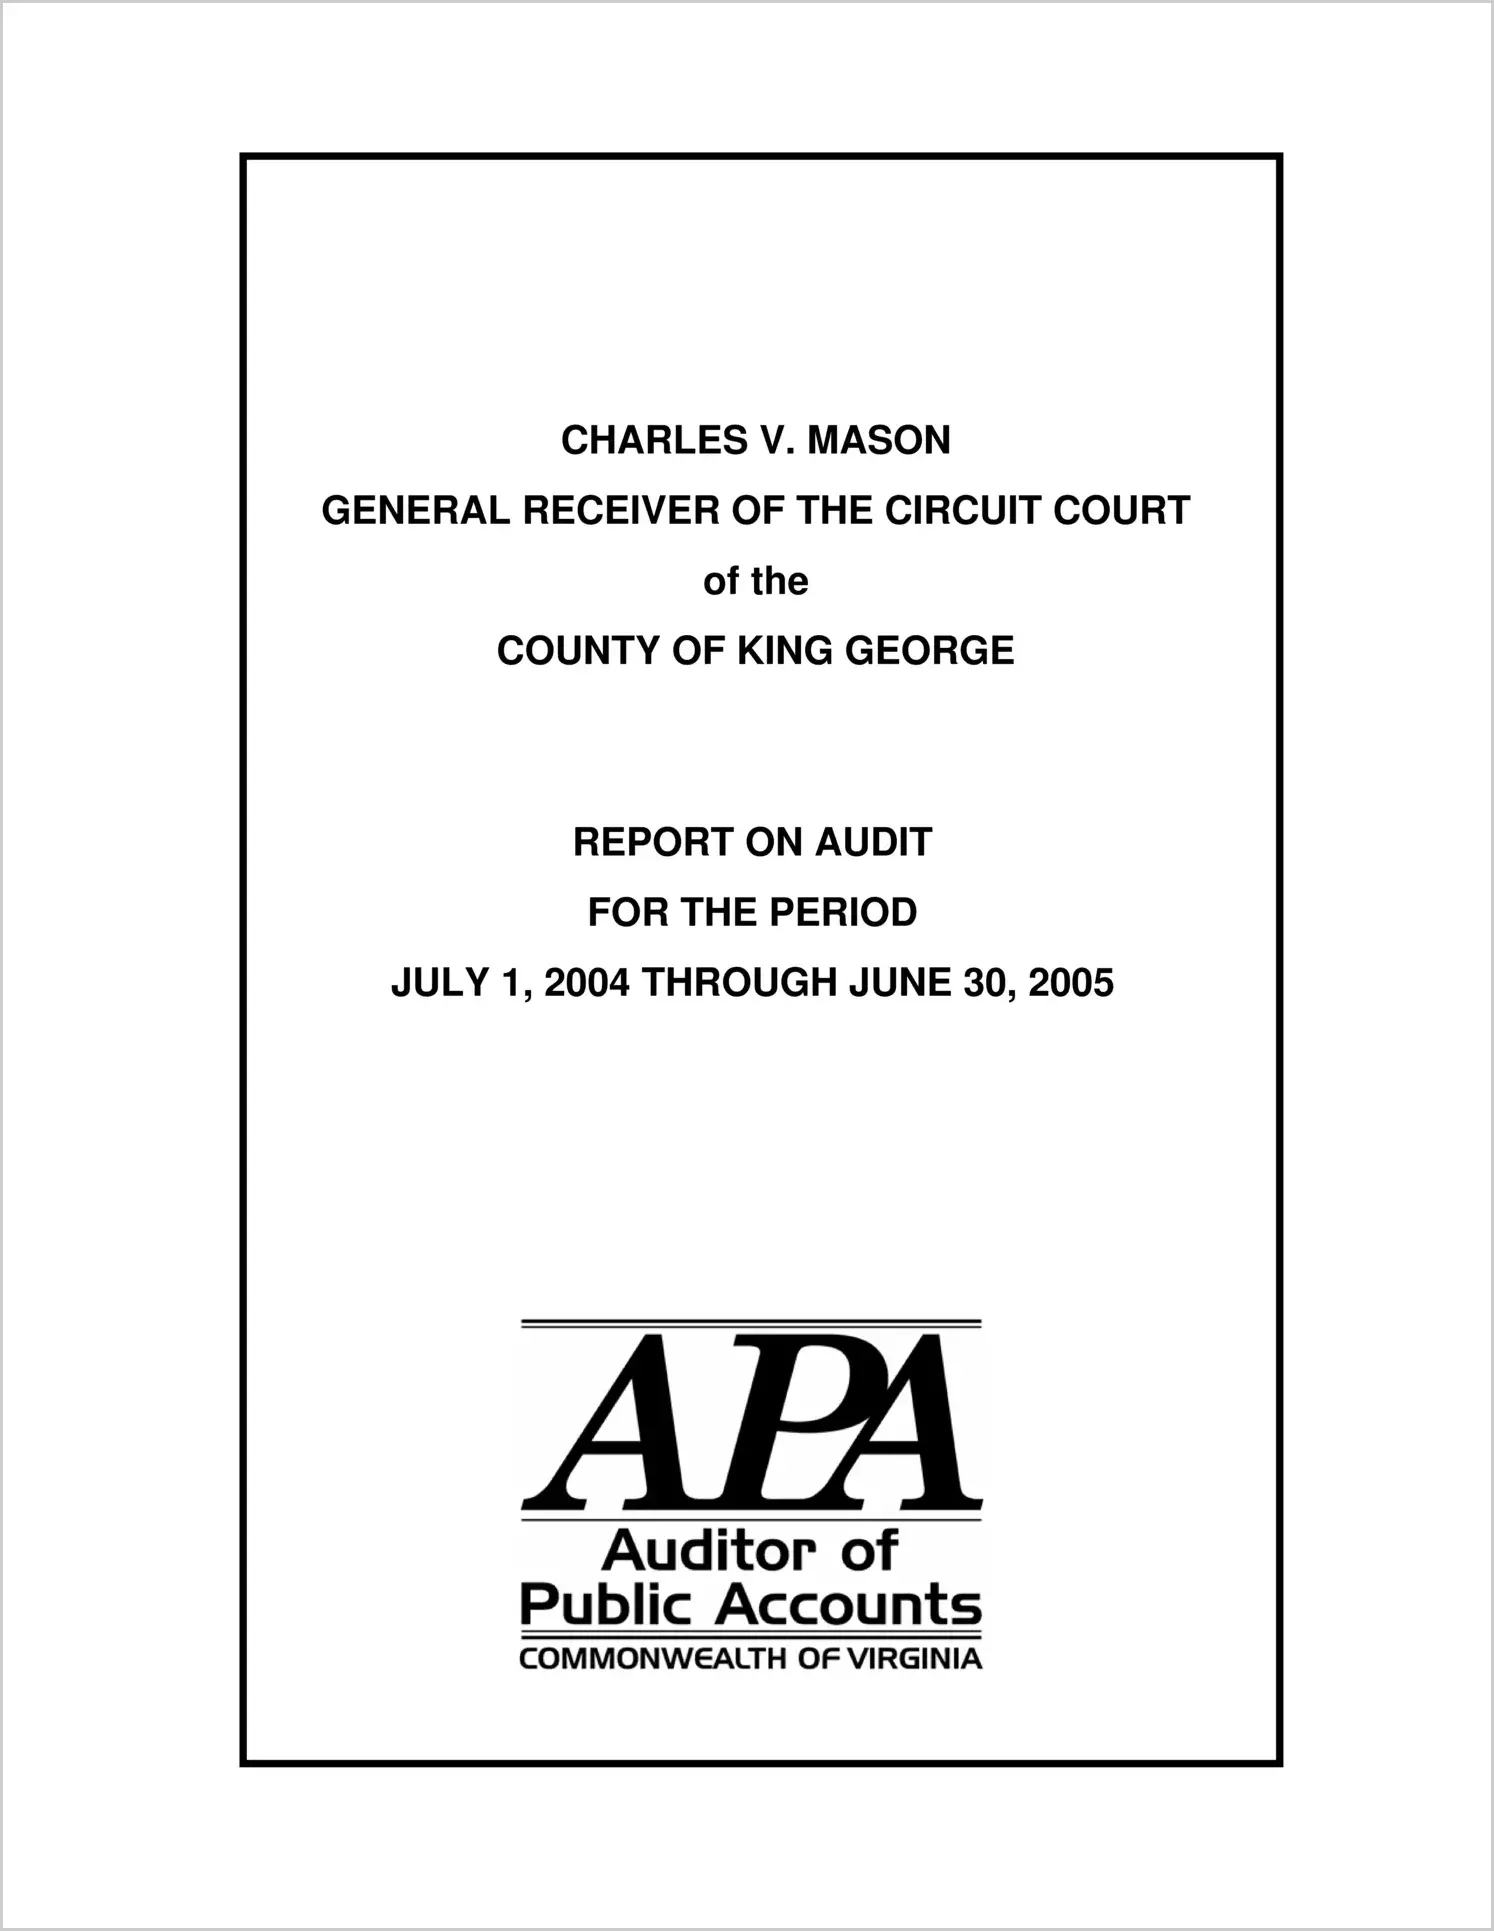 General Receiver of the Circuit Court of the County of King George for the period July 1, 2004 through June 30, 2005